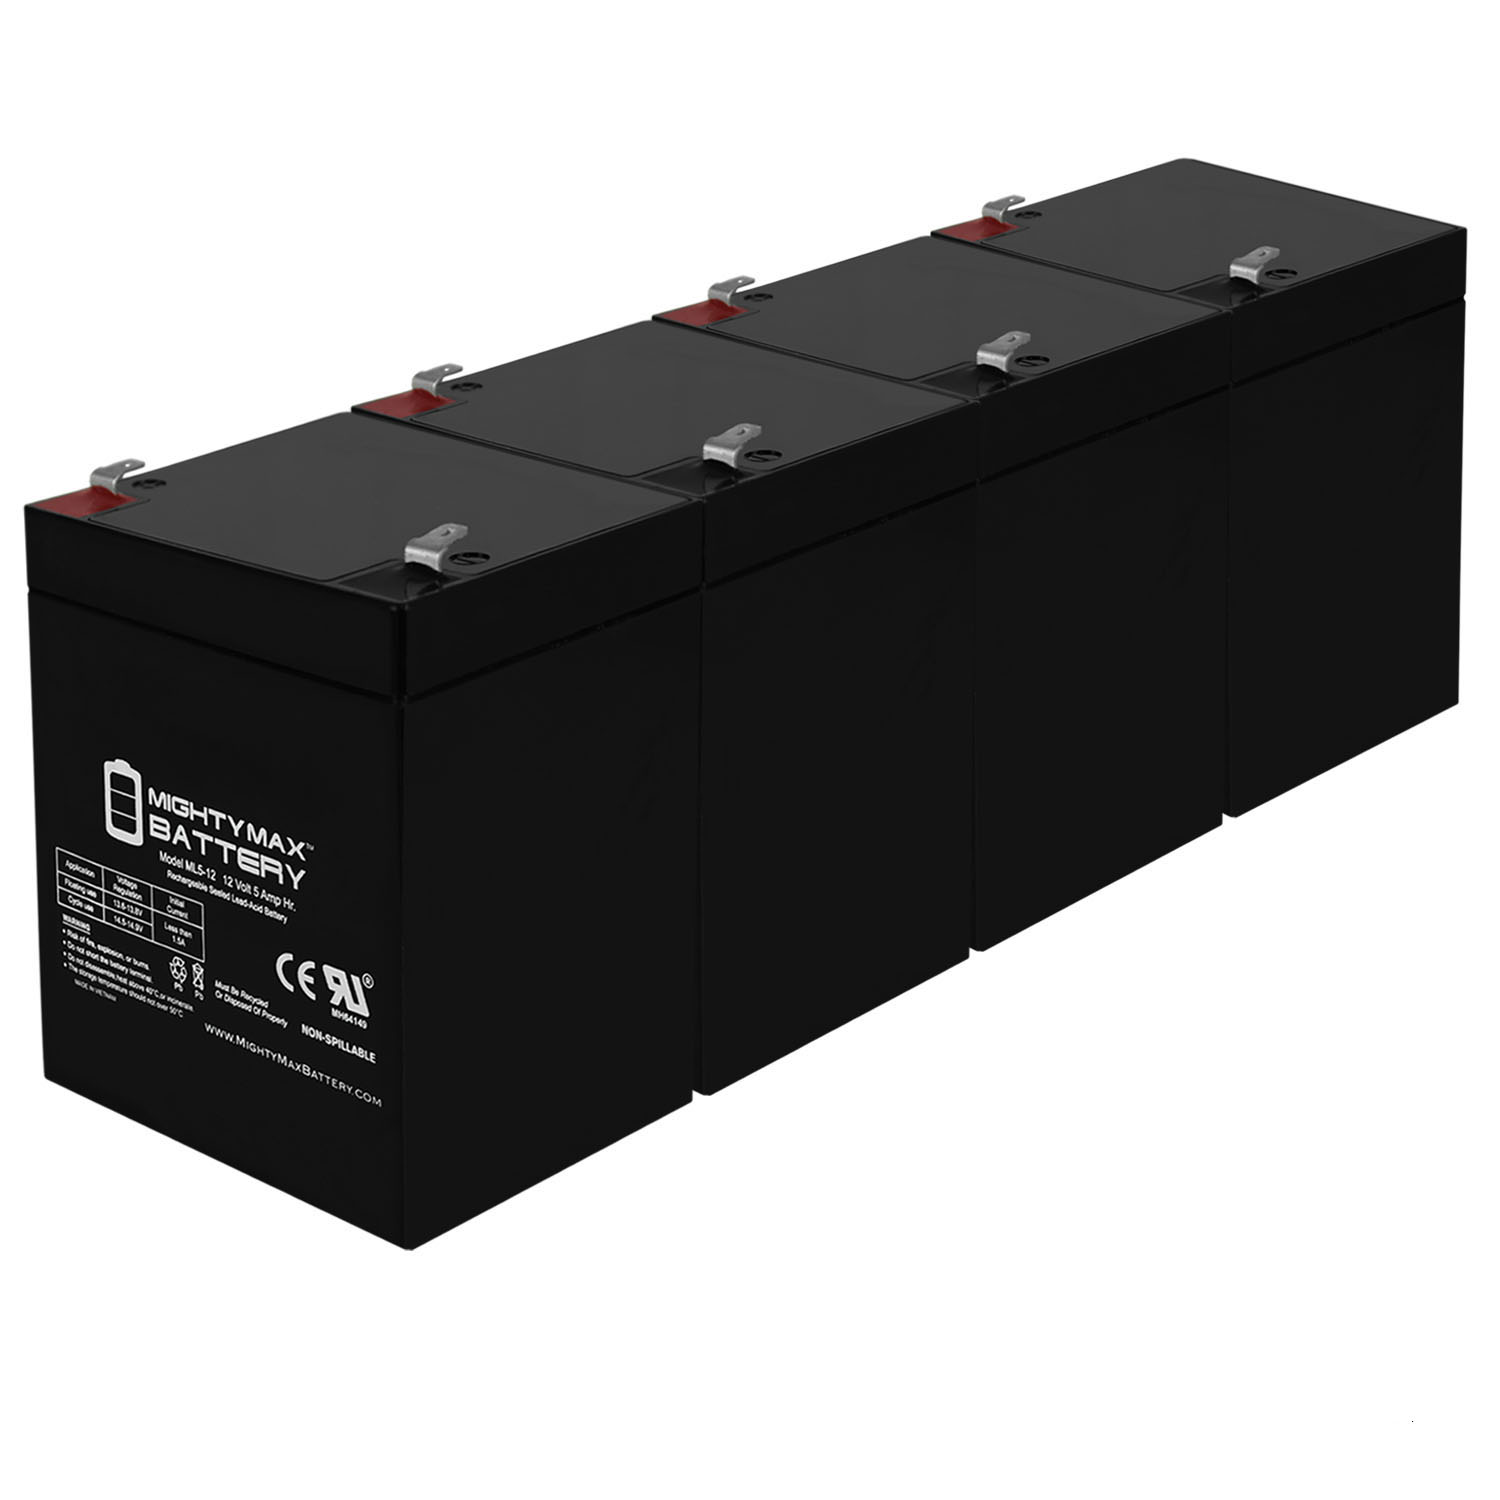 12V 5AH SLA Replacement Battery for Neata NT12-5A - 4 Pack